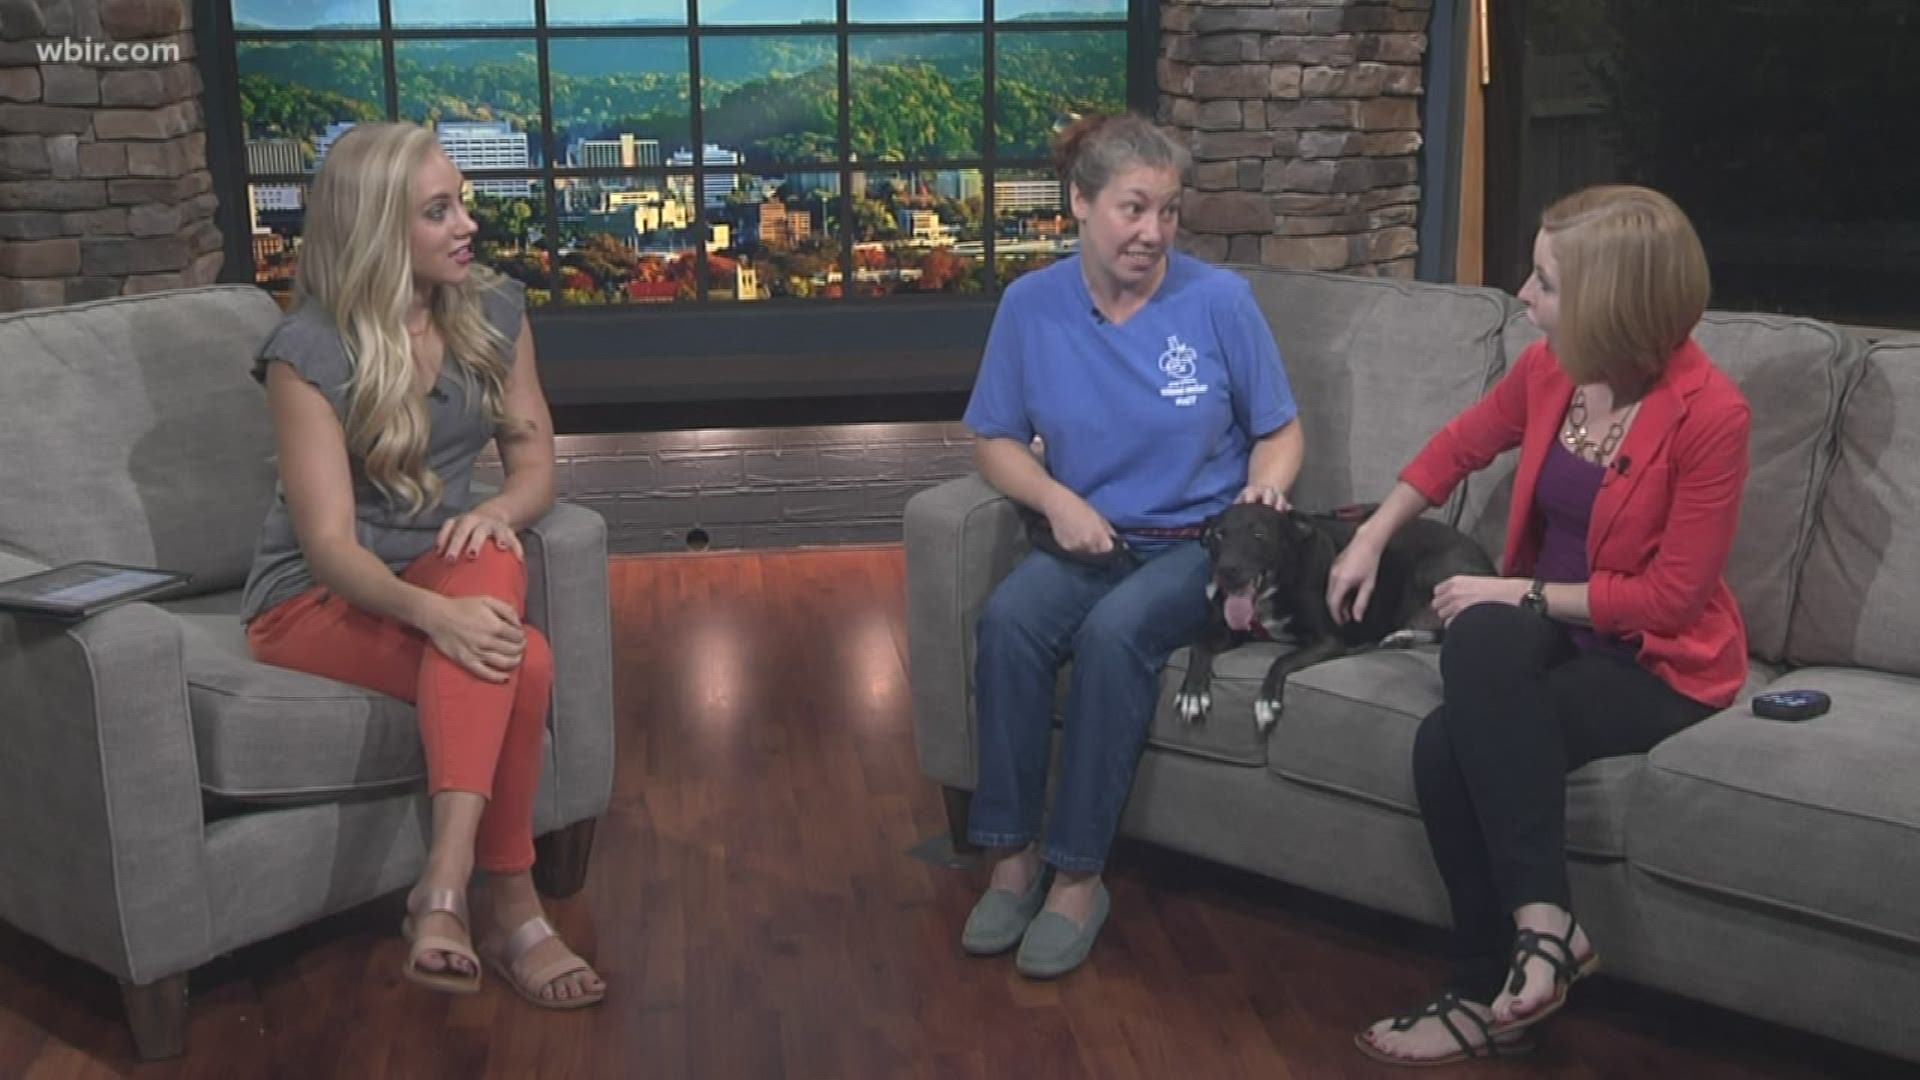 Young Williams Animal Center introduces us to Flash and talks about the importance of spaying and neutering your pets.